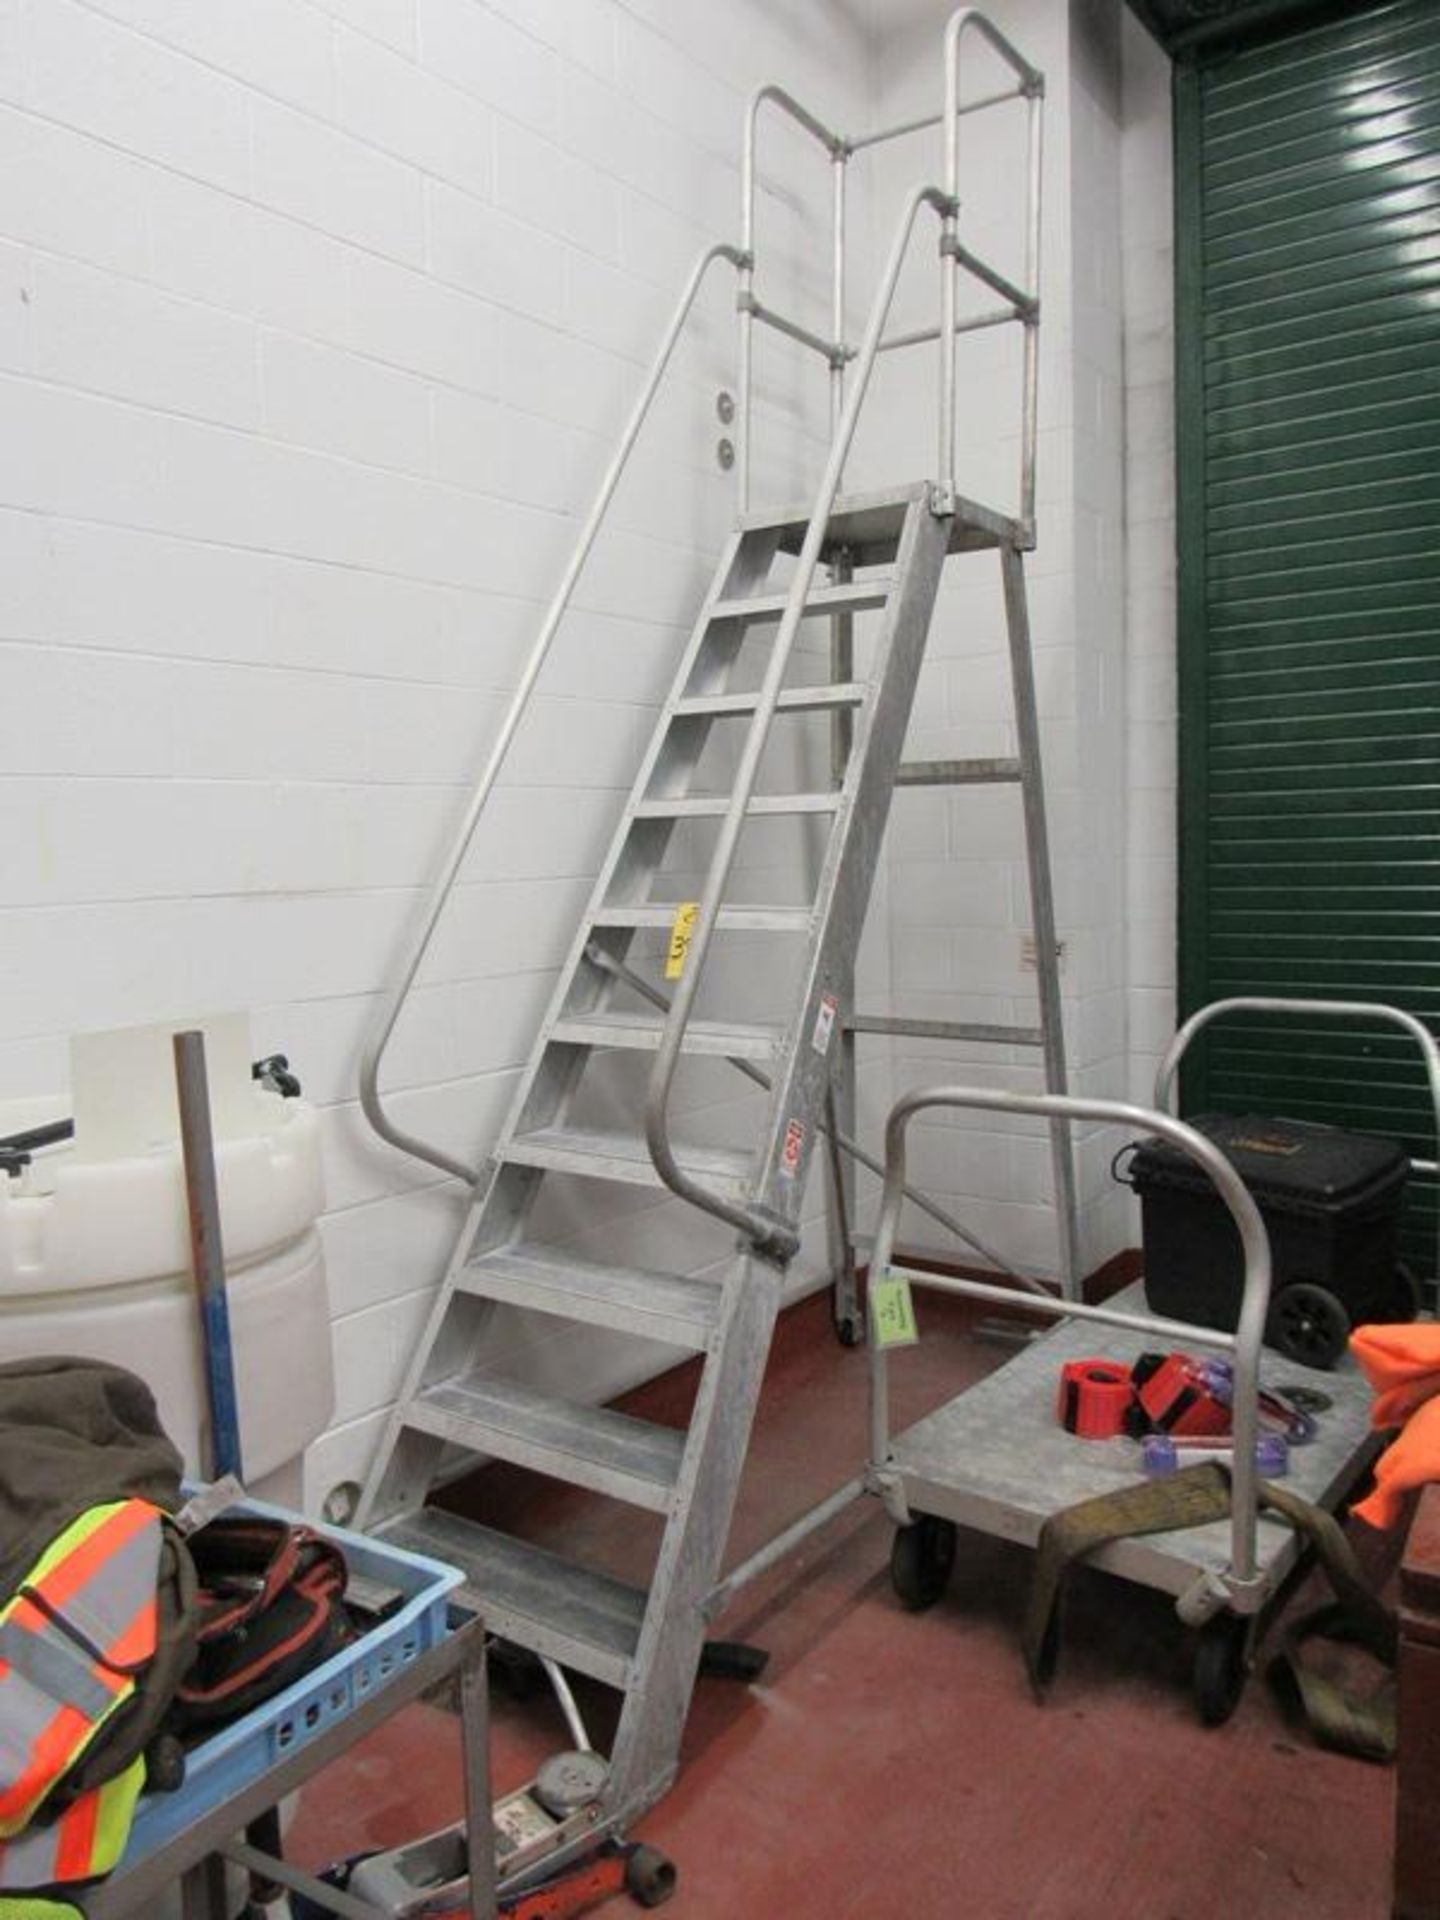 Portable Aluminum Warehouse Ladder, 24" W X 90" T to platform, 11' Tall with handrail X 7' Long (